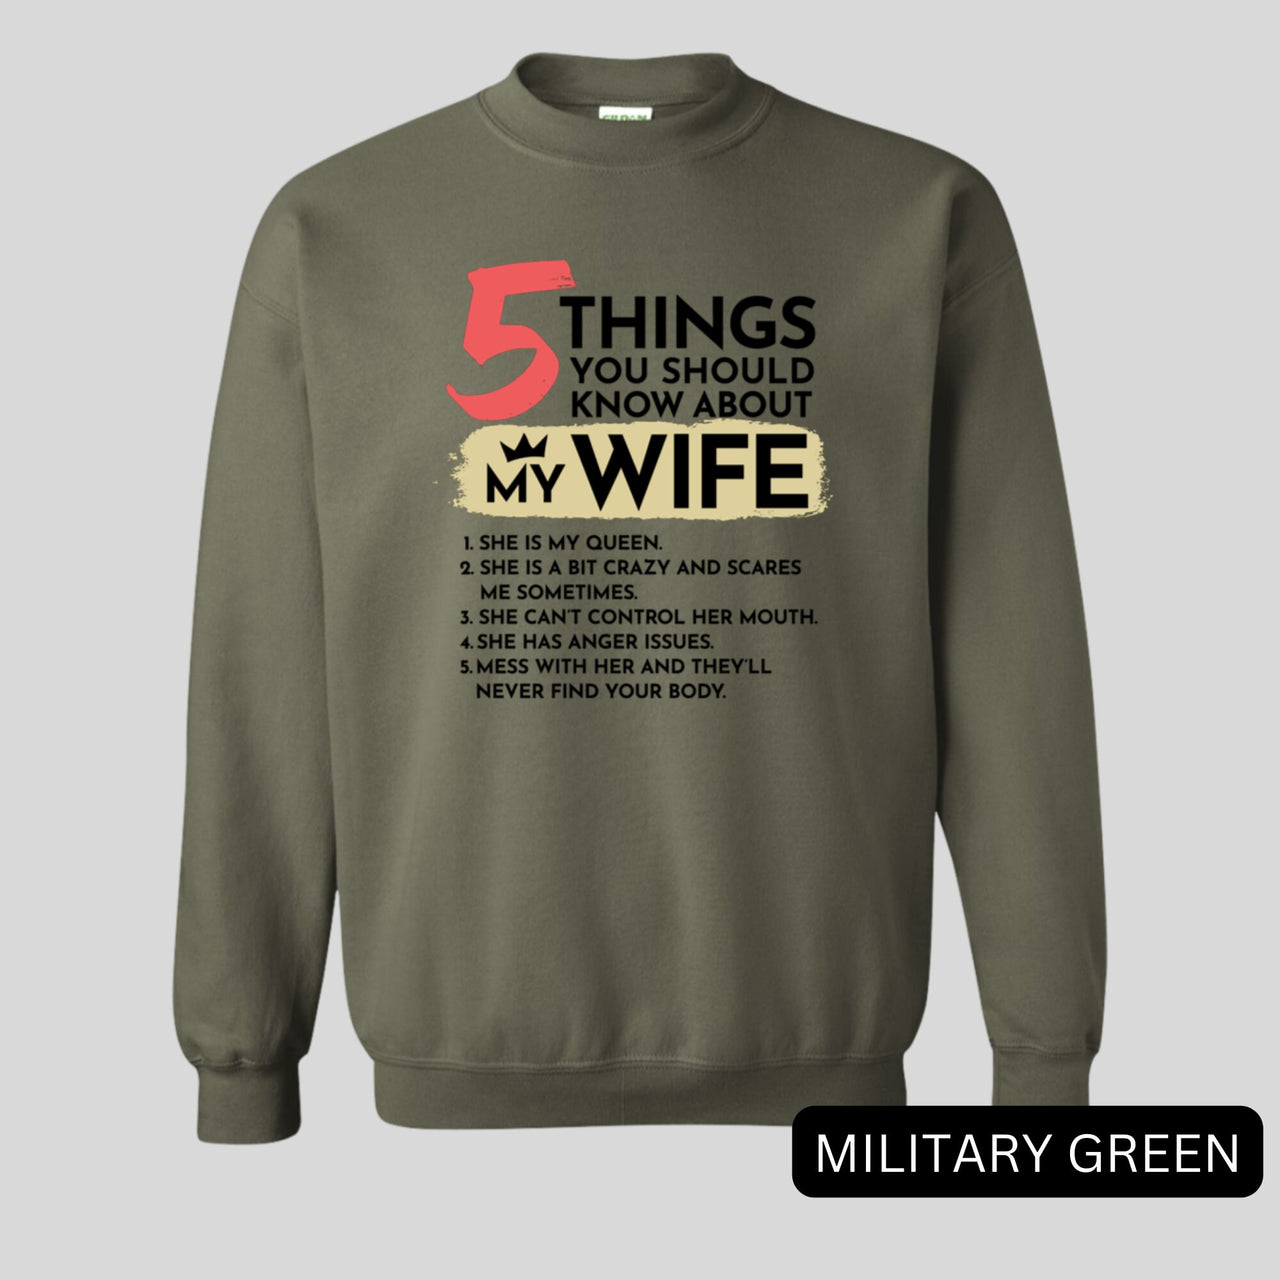 5 Things You Should Know About My Wife Sweatshirt